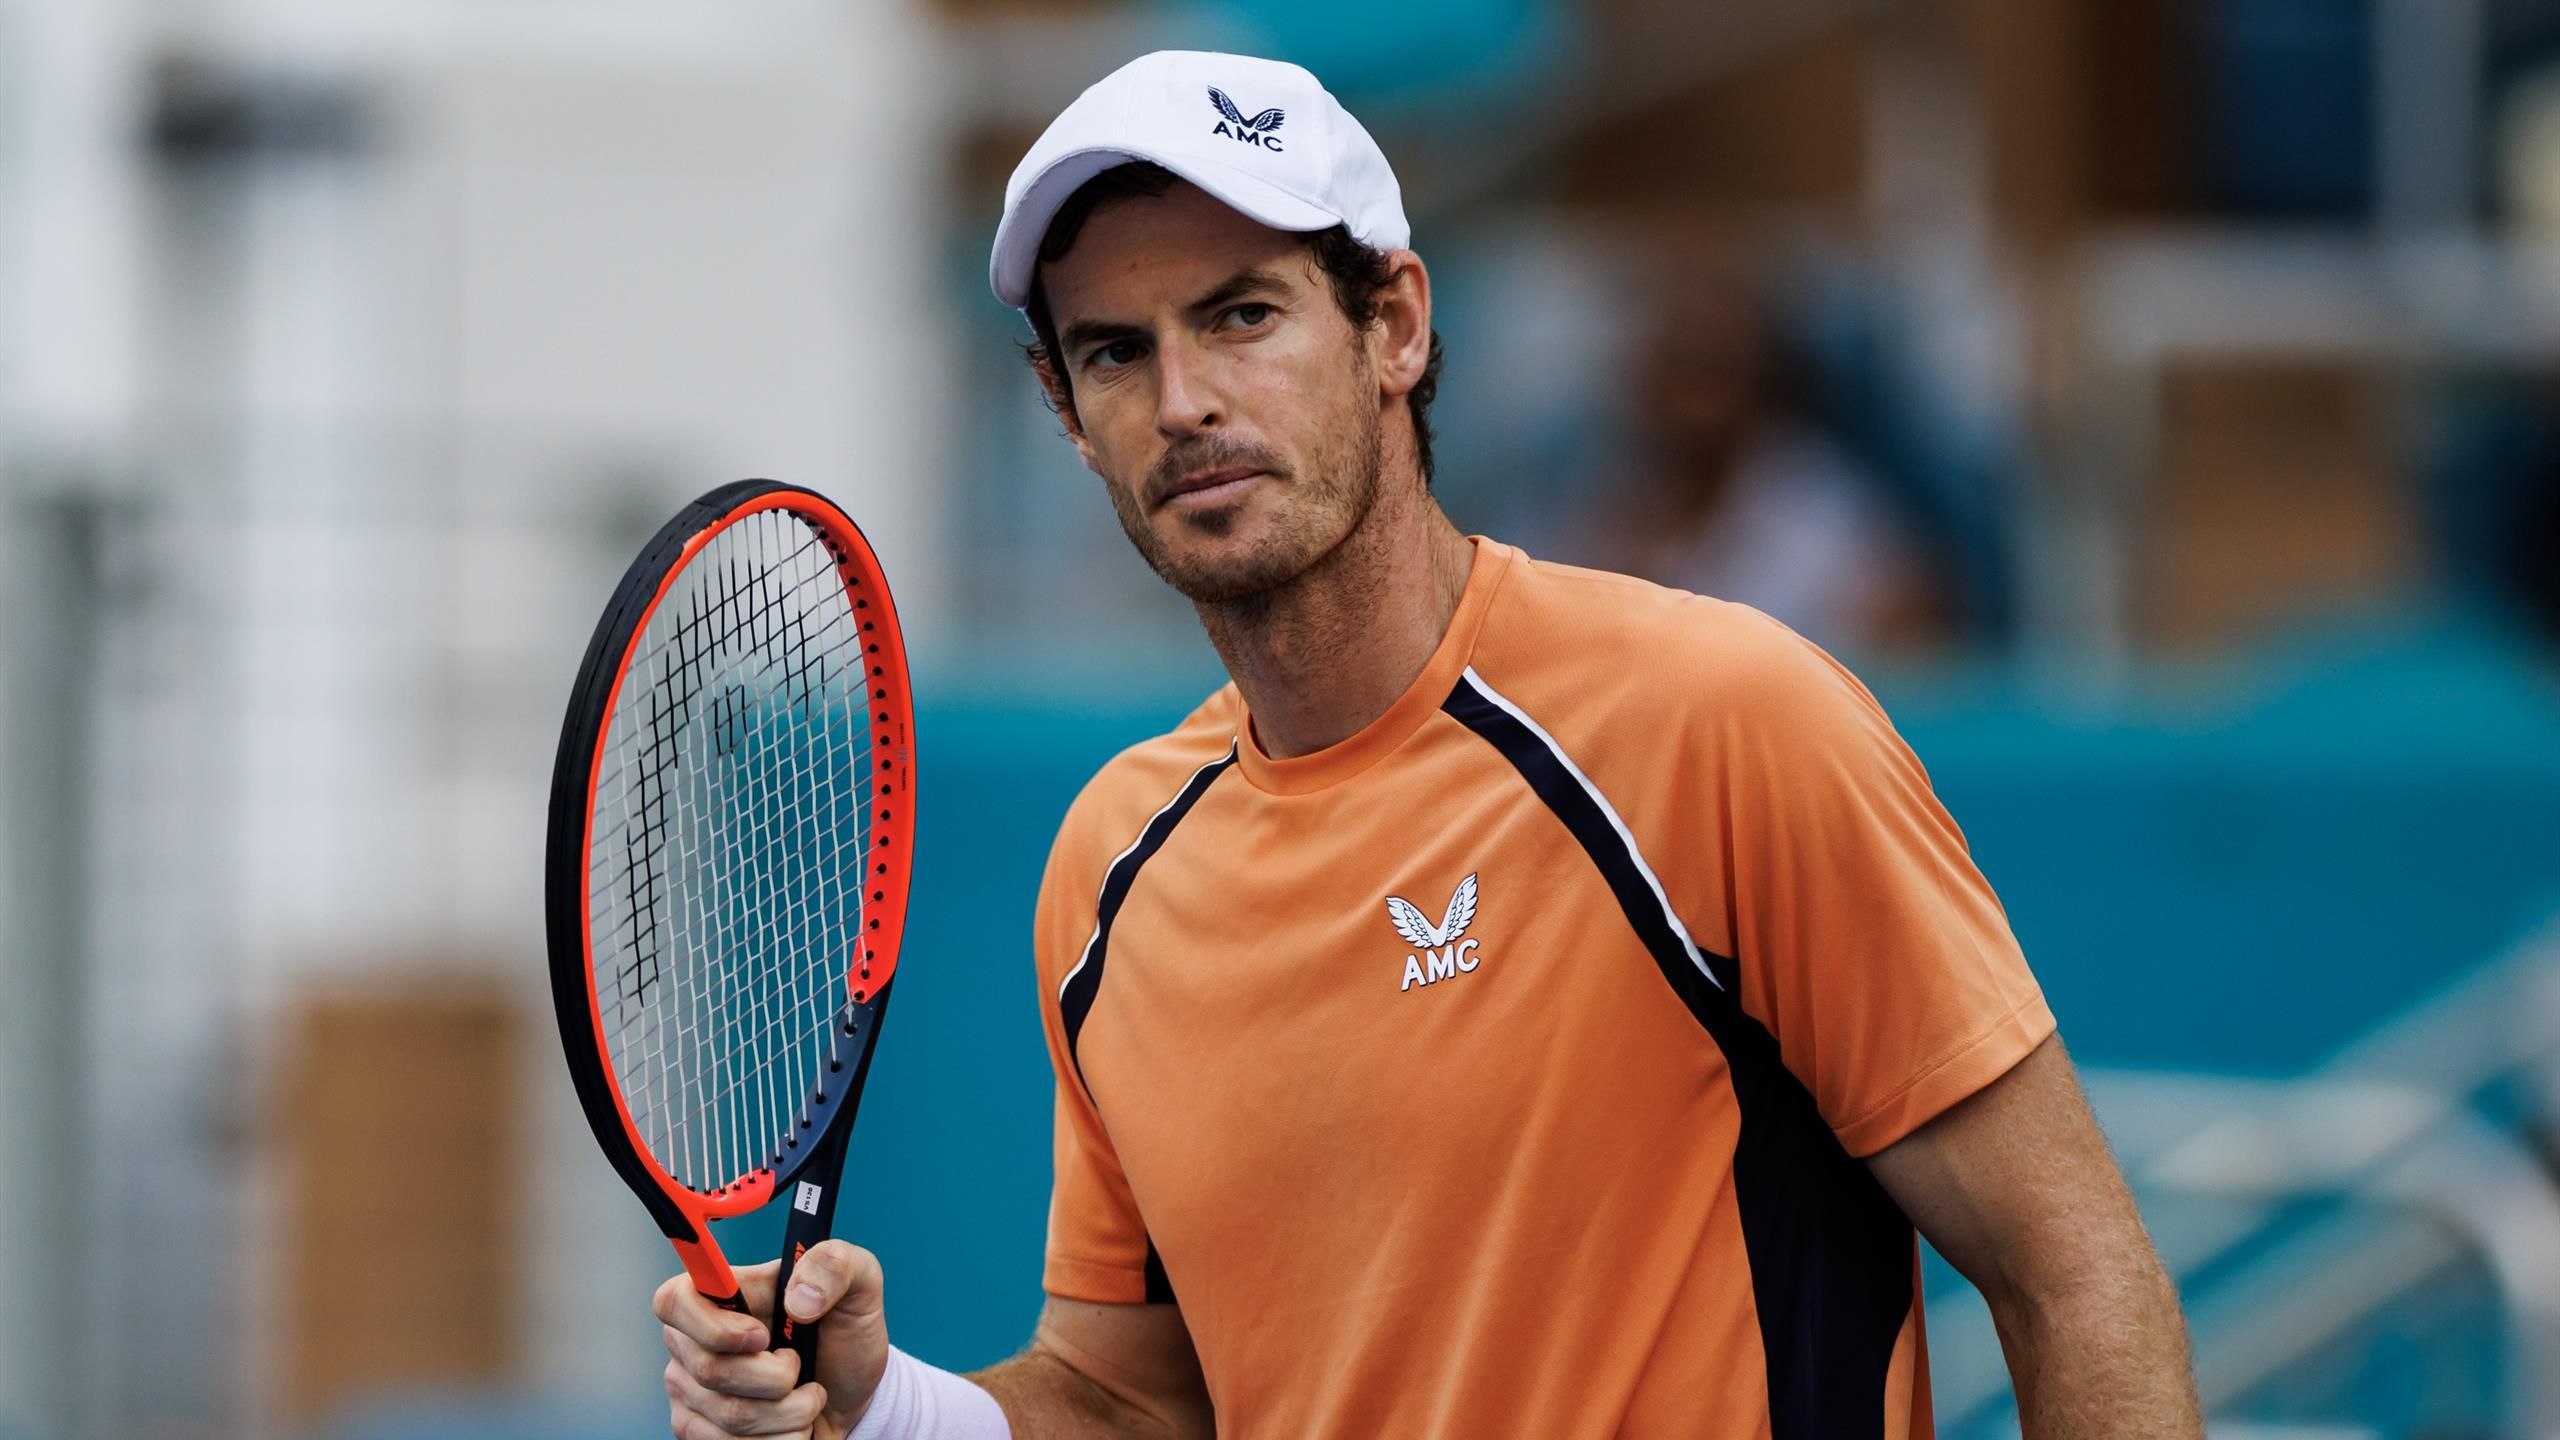 Andy Murray training on clay ahead of potential Grand Slam return after saying he hopes to play French Open – Eurosport